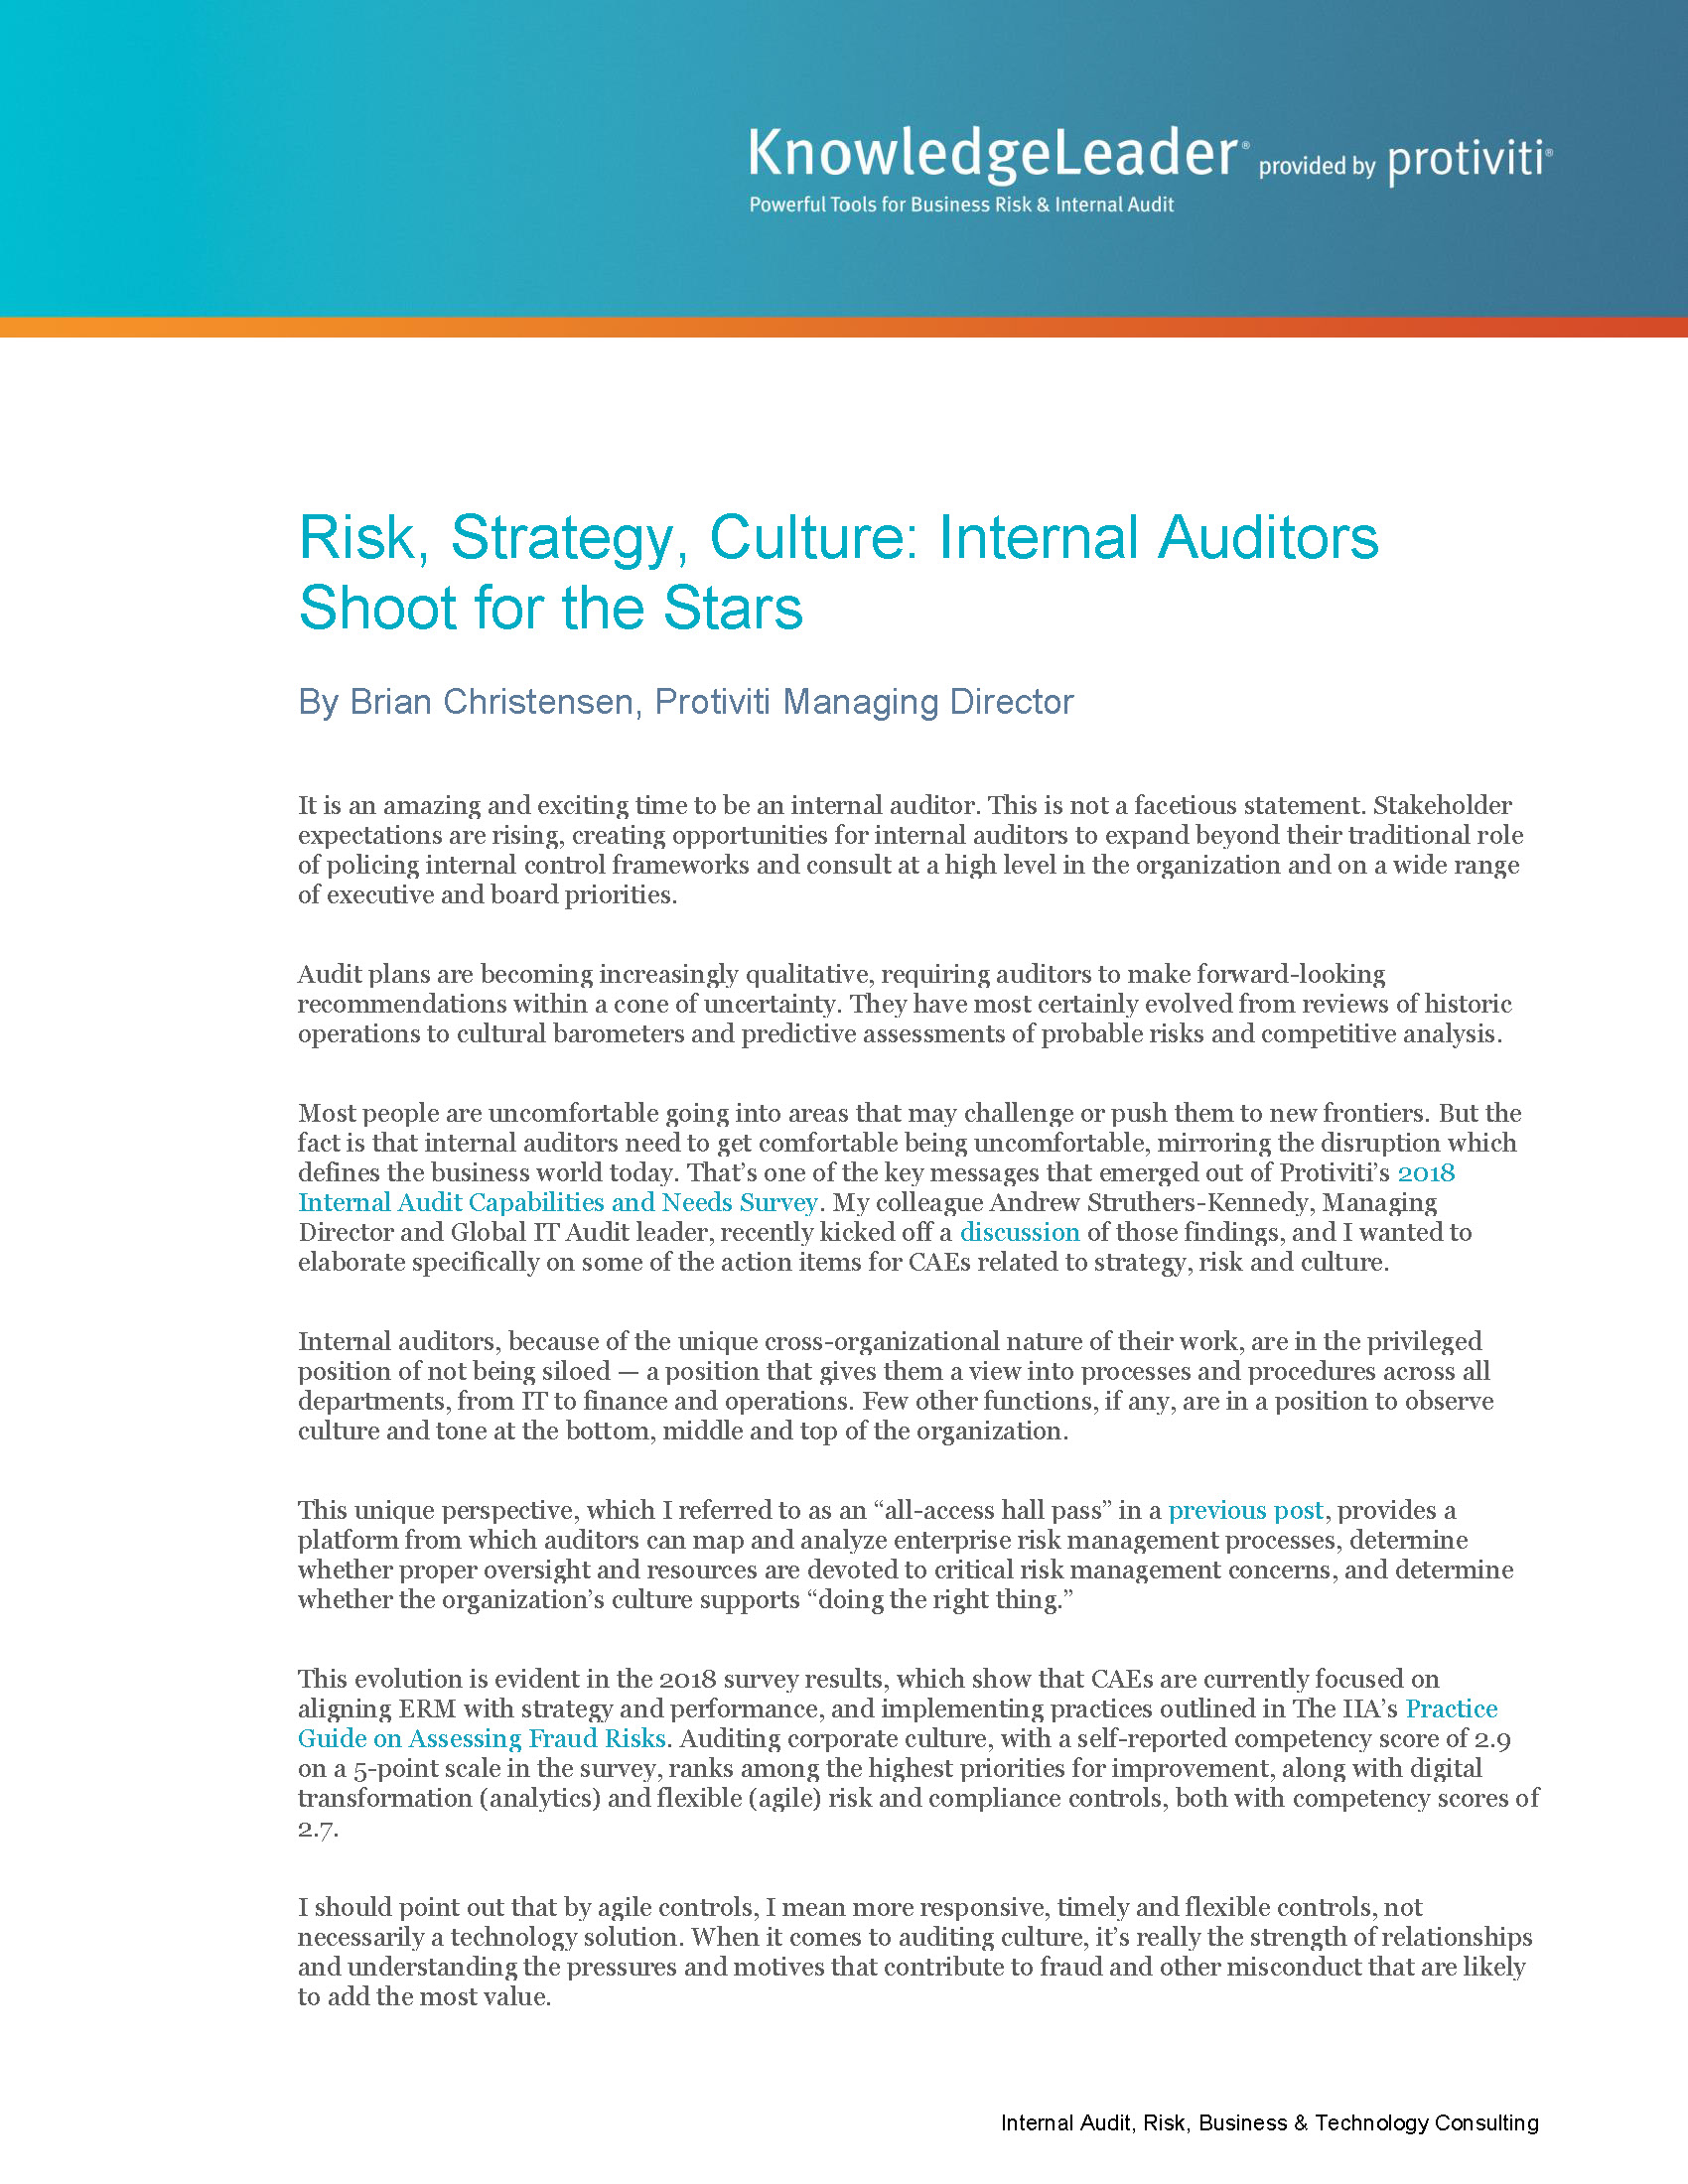 Screenshot of the first page of Risk, Strategy, Culture Internal Auditors Shoot for the Stars